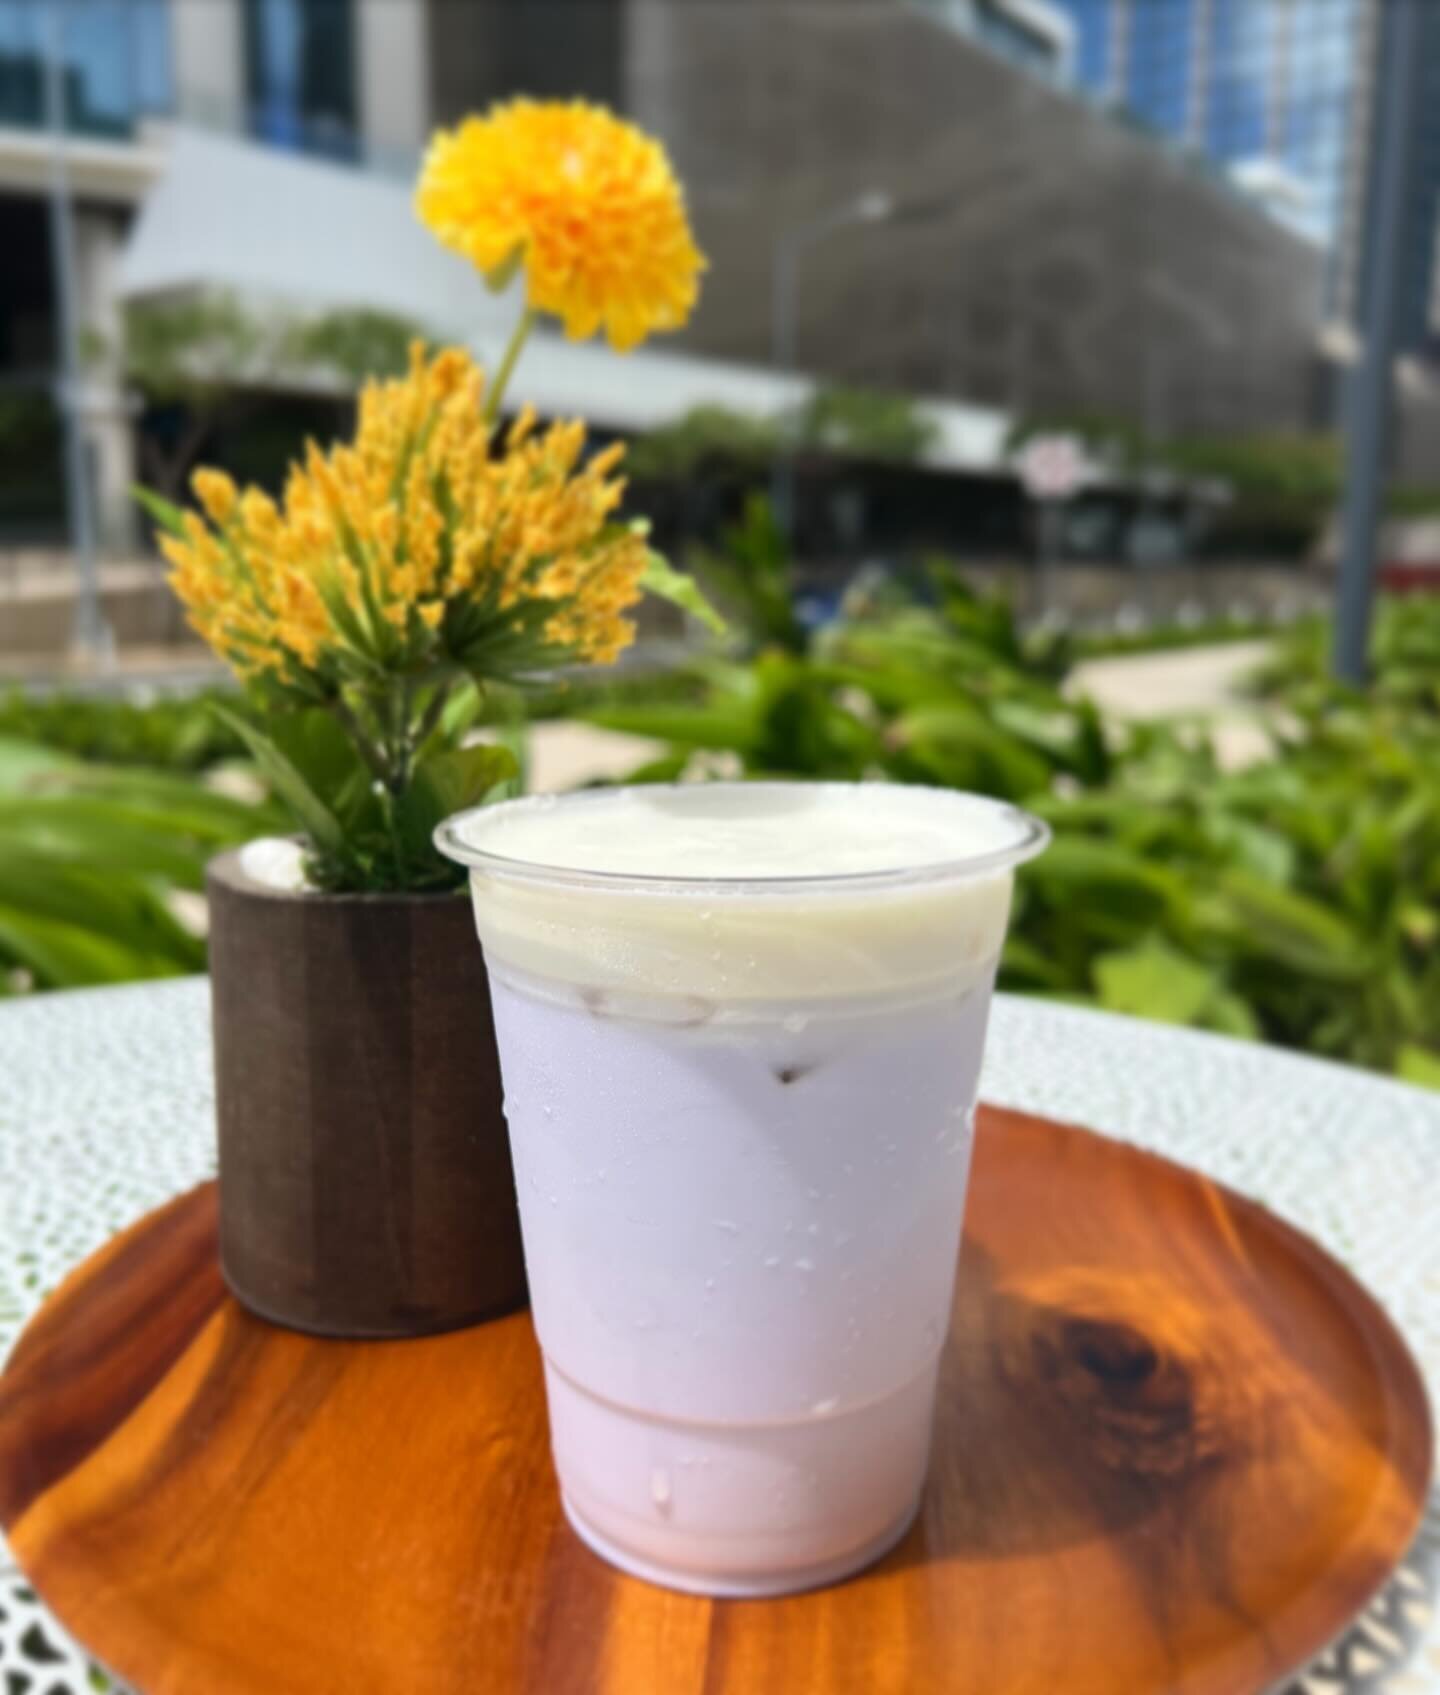 Happy Good Friday! 💜 

Start off your Easter weekend with our Sea Salt Taro Latte! It&rsquo;s a sweet taro latte base with vanilla sea salt foam on top. It&rsquo;s the perfect sweet and salty combo! This is also one of our non-caffeinated options, s